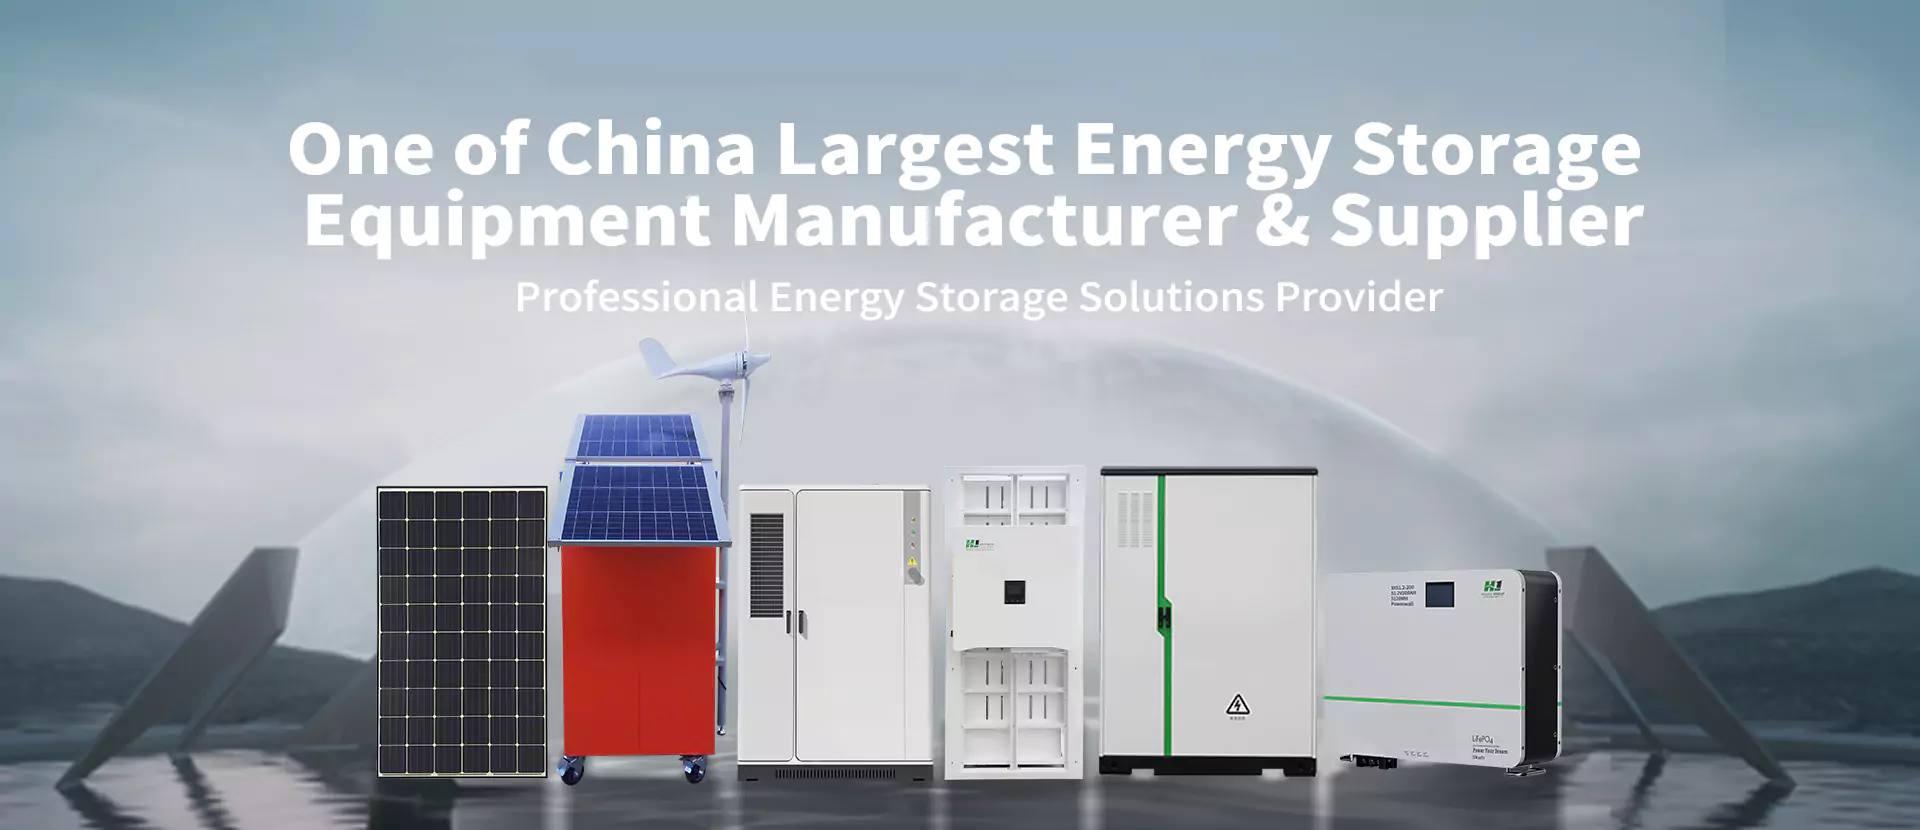 One of China Largest Energy Storage Equipment Manufacturer & Supplier